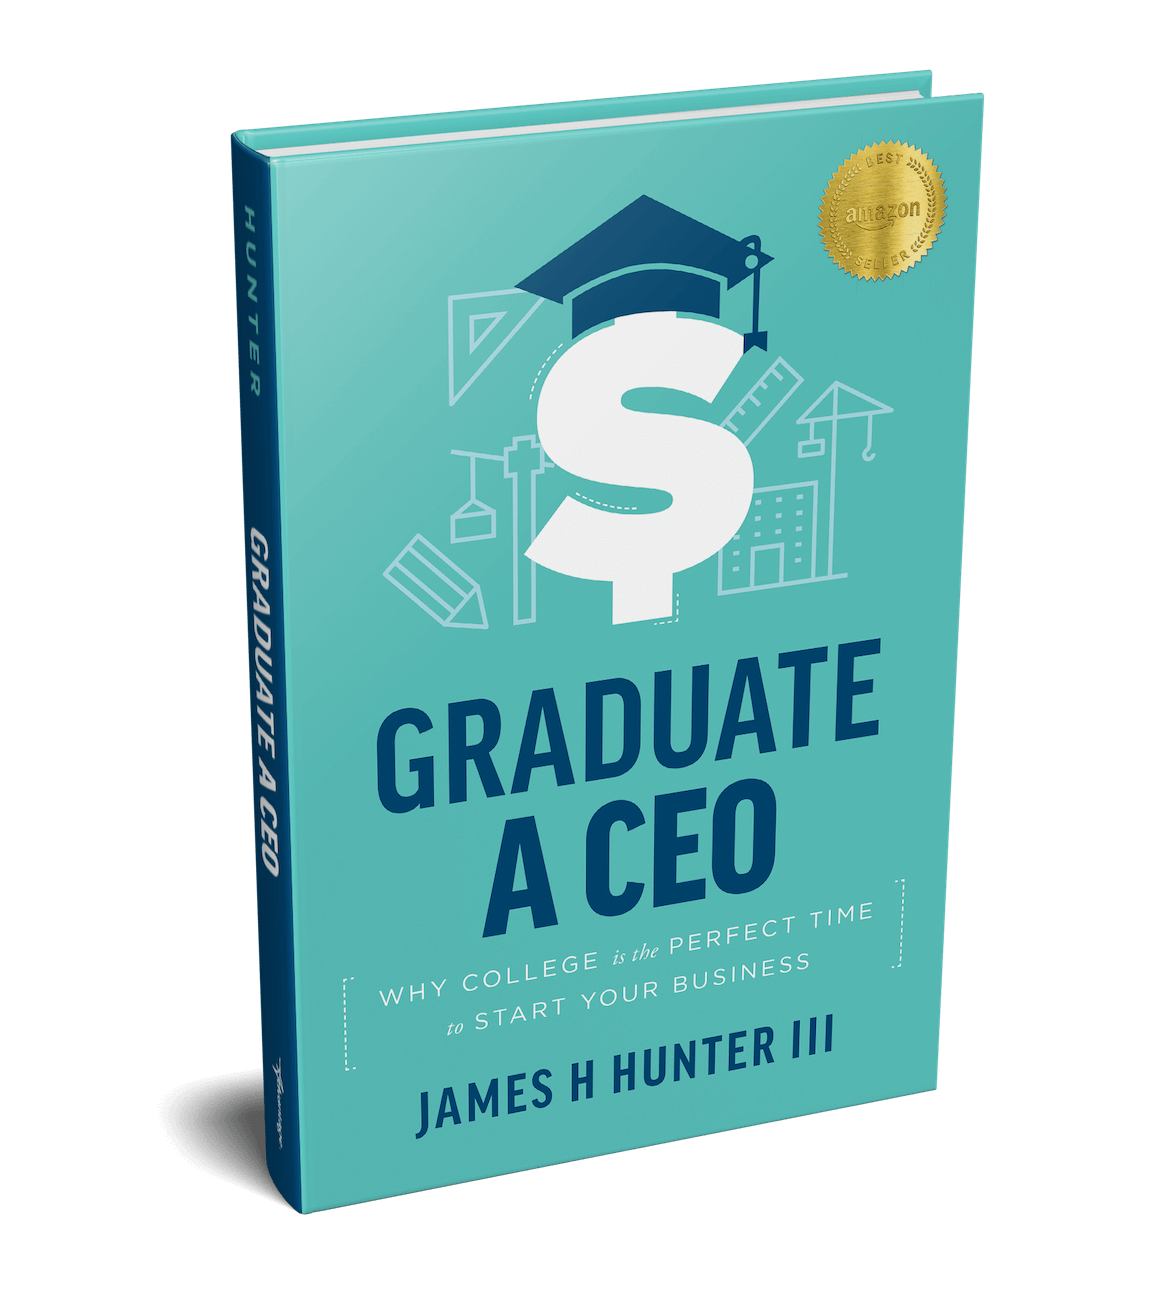 Graduate A CEO book by james h hunter